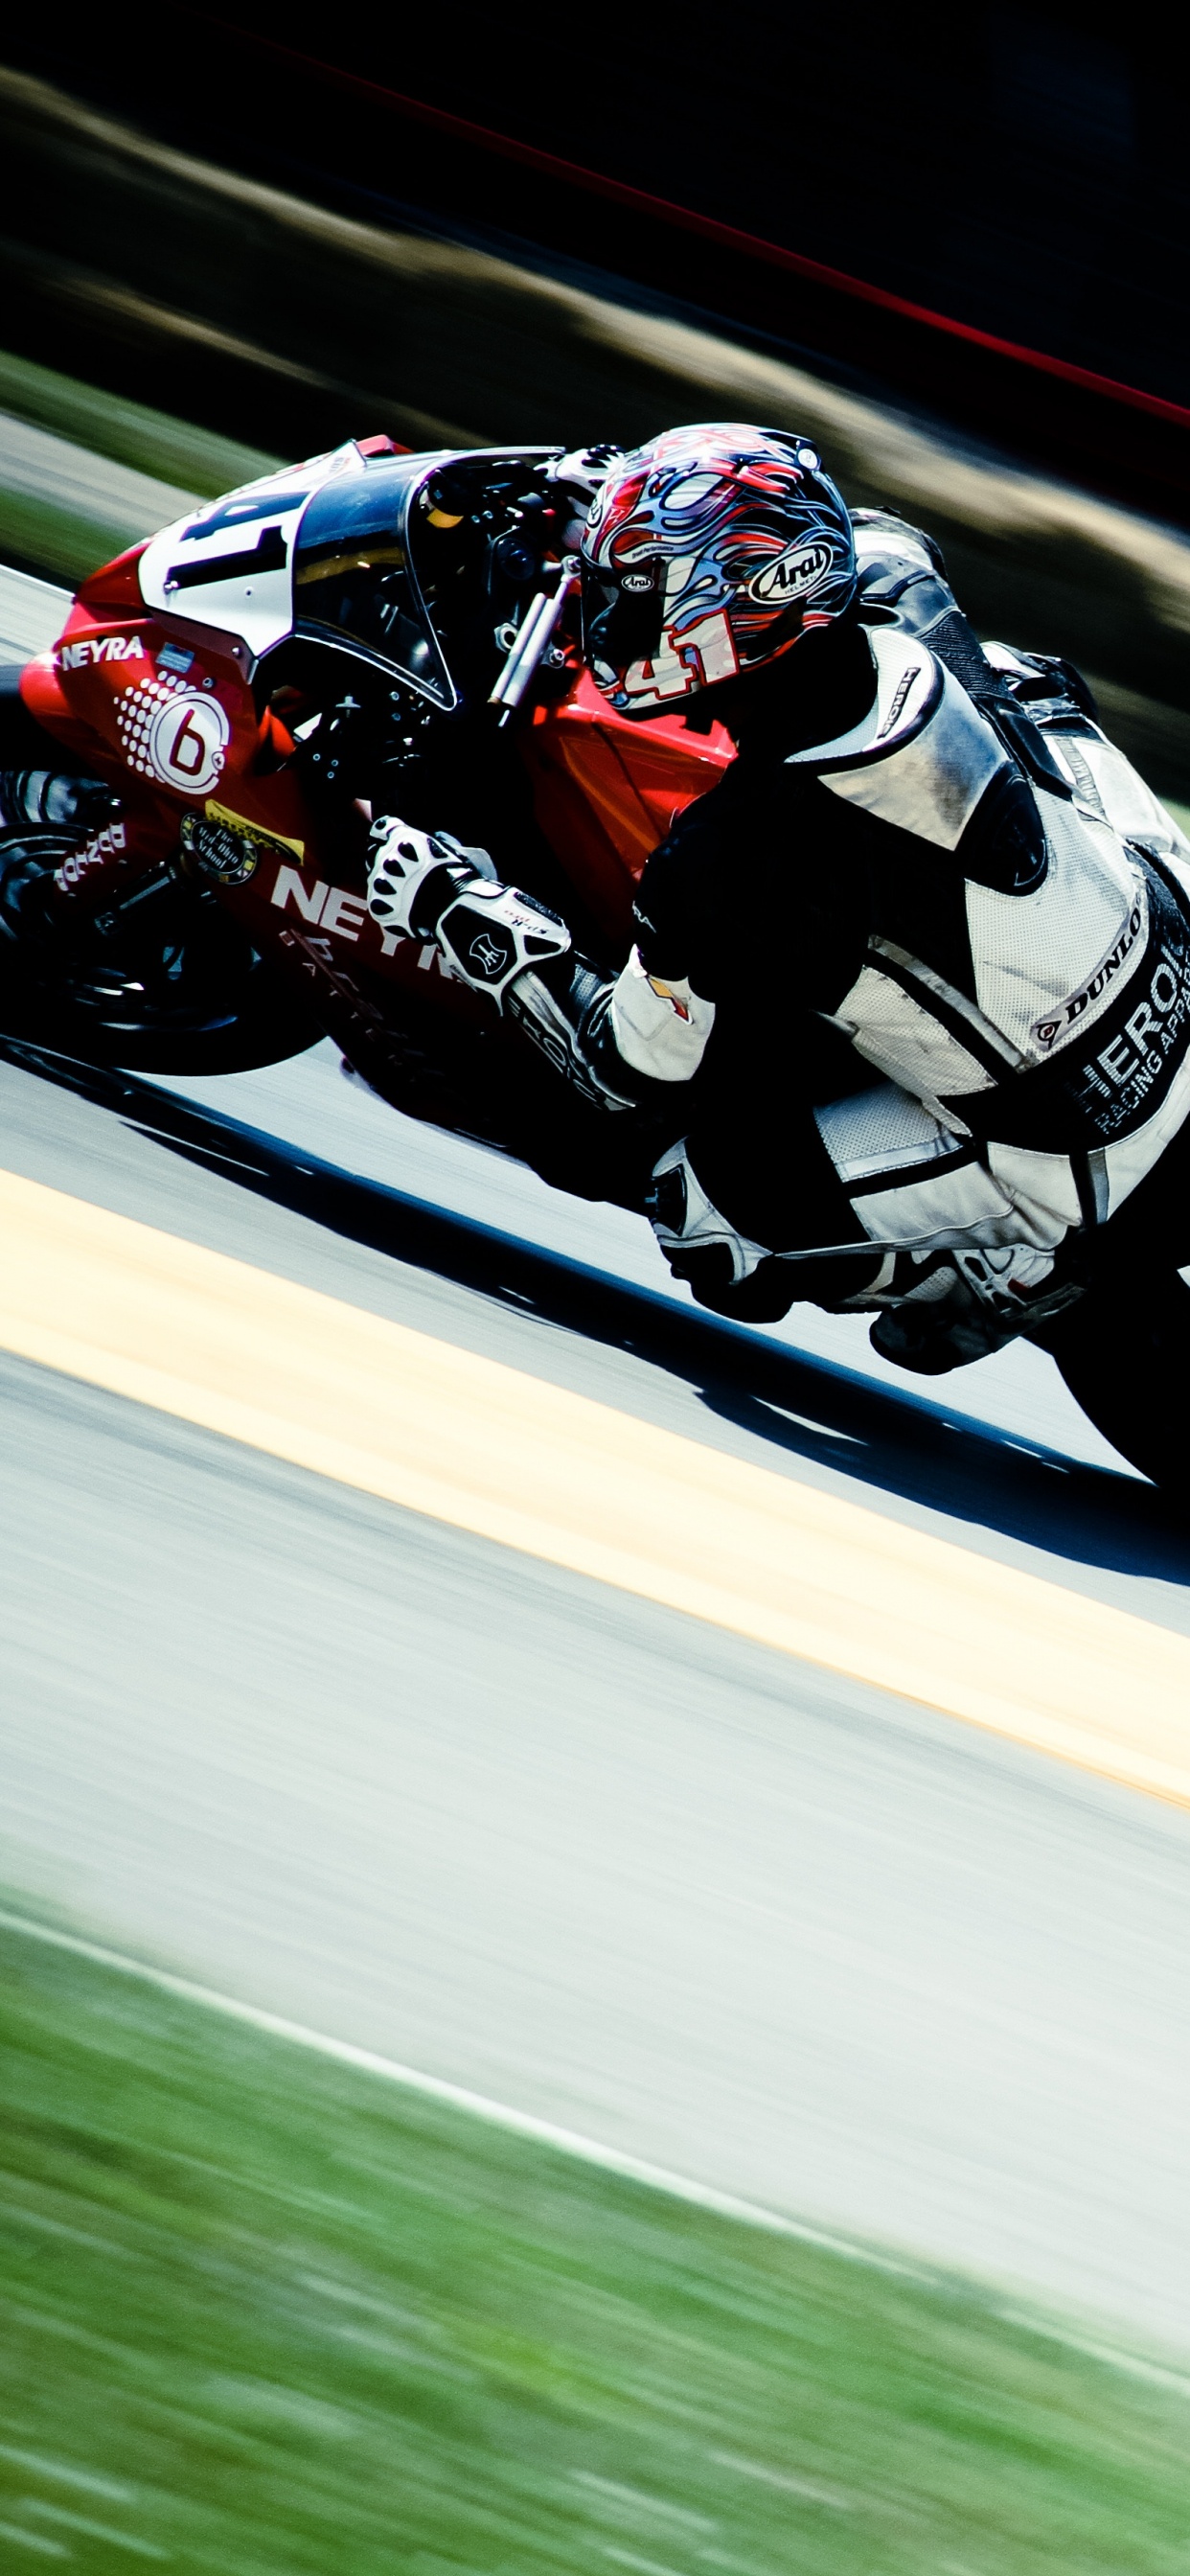 Man in Red and White Racing Suit Riding on Sports Bike. Wallpaper in 1242x2688 Resolution